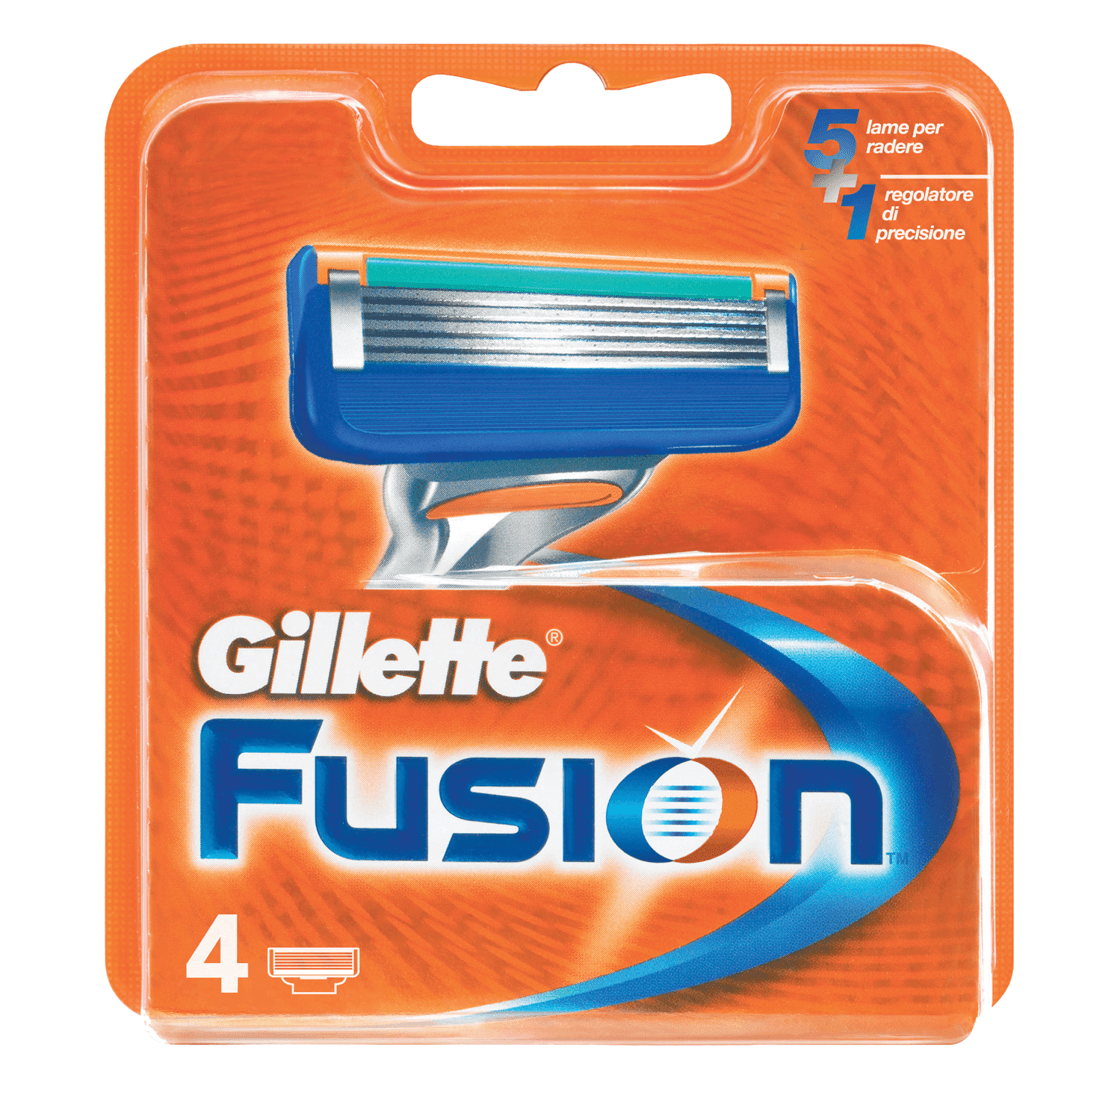 Gillette Fusion Manual Blades 4s Box Of 10 Cards Mashco